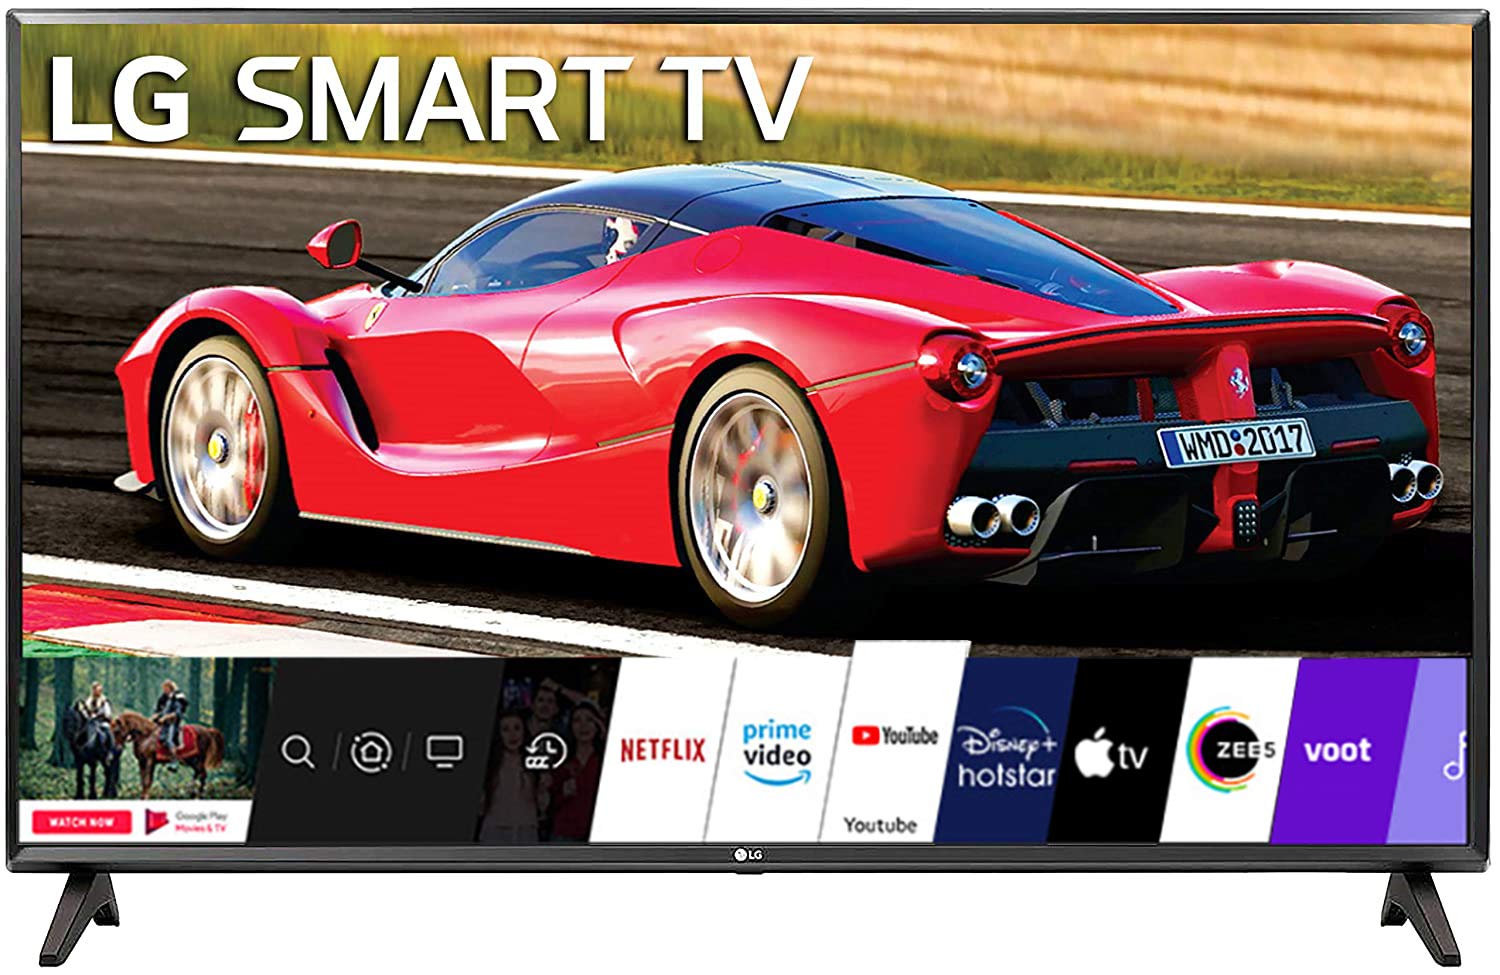 Amazon Great Indian Festival Sale: 32 inch smart TV will not get a better deal than this, Amazon offers to buy it for less than 15 thousand